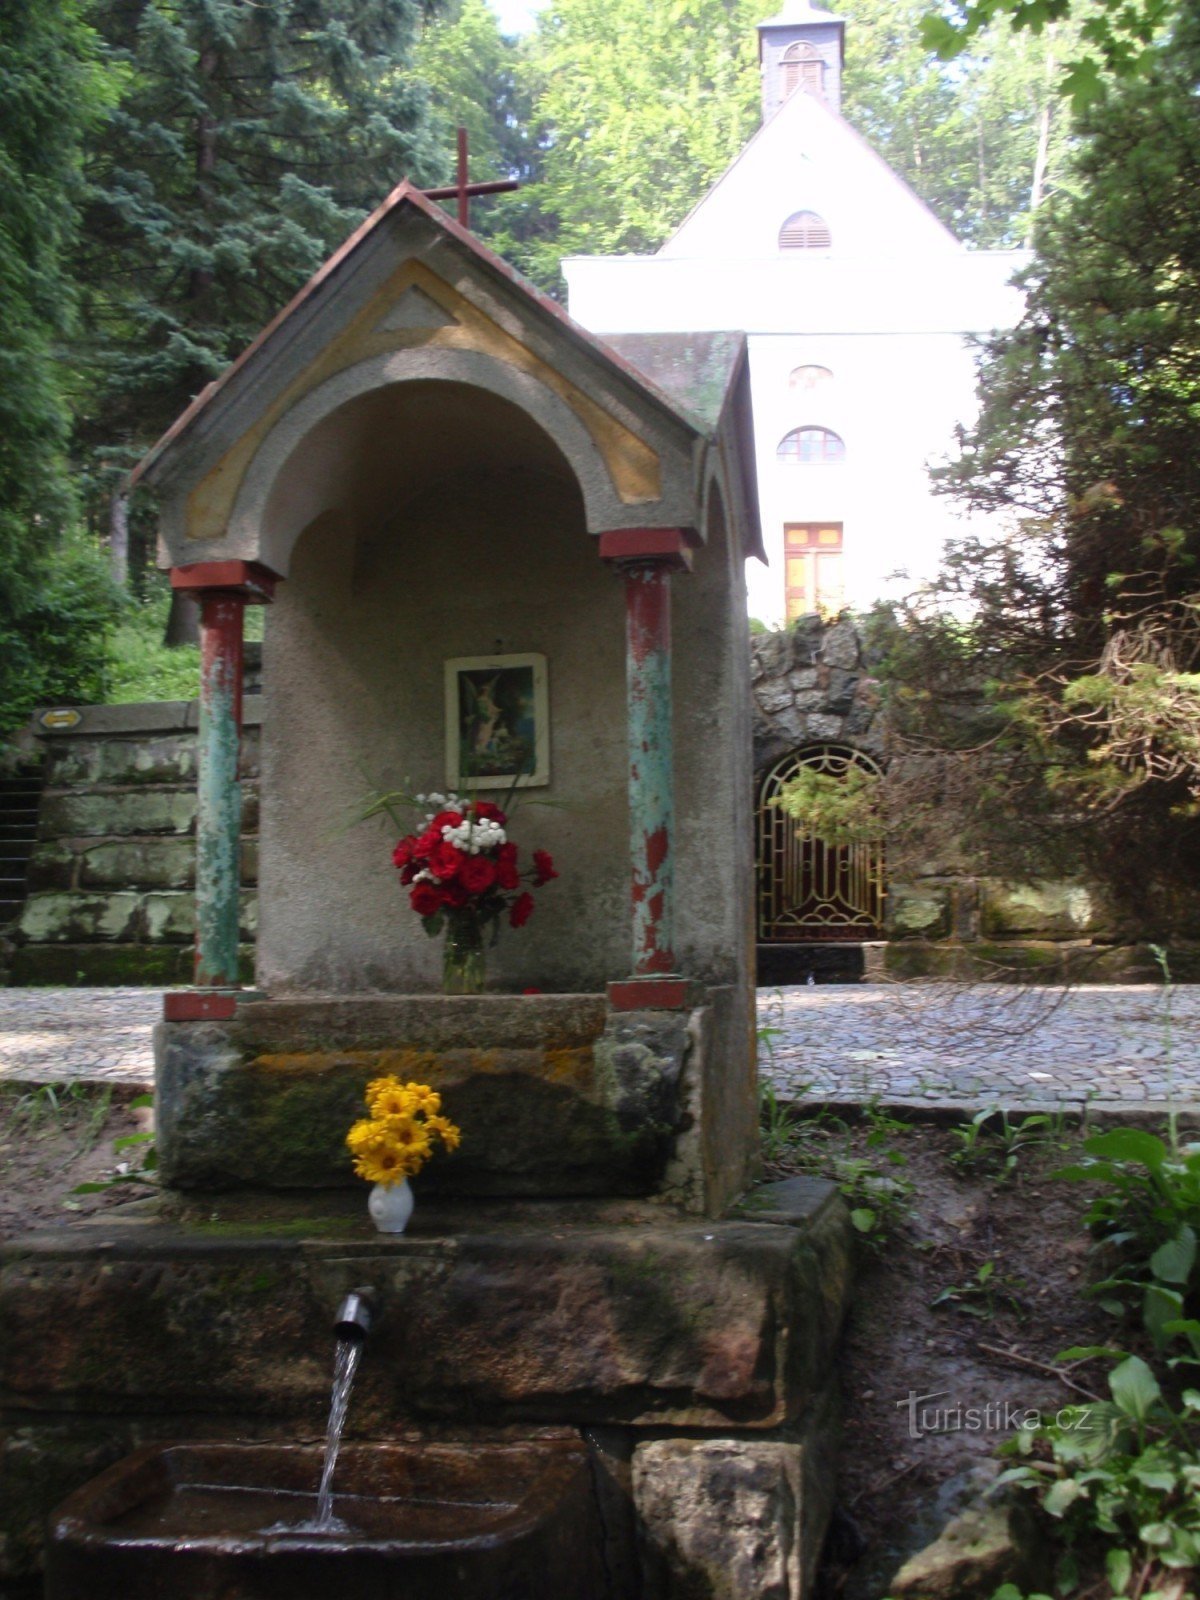 A place of pilgrimage, the Way of the Cross and the former spa of the Mother of God Mountains near Česká Třebová